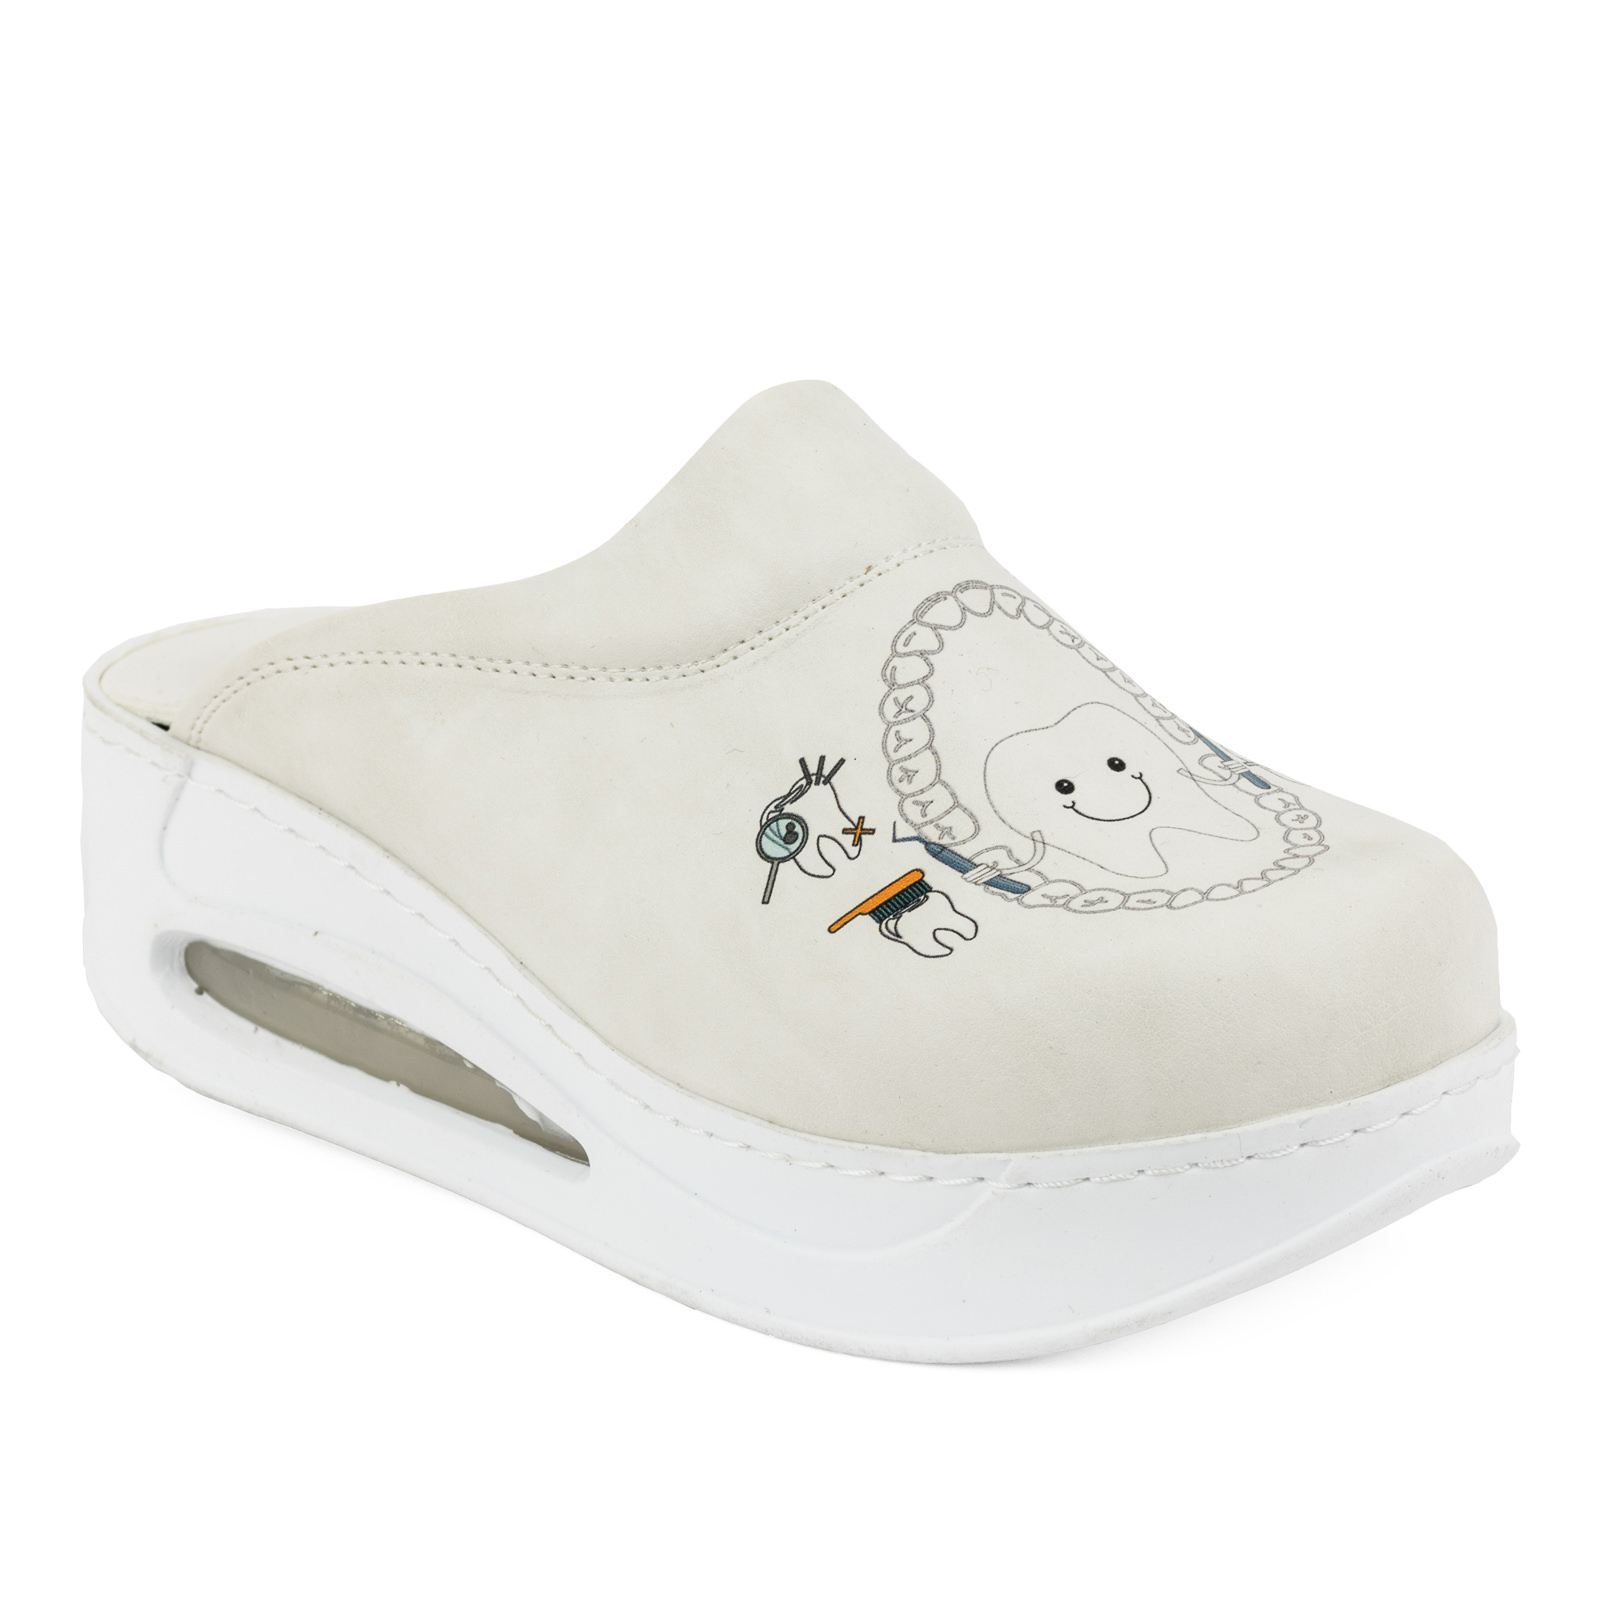 Patterned women clogs A101 - DENTIST AIR - WHITE